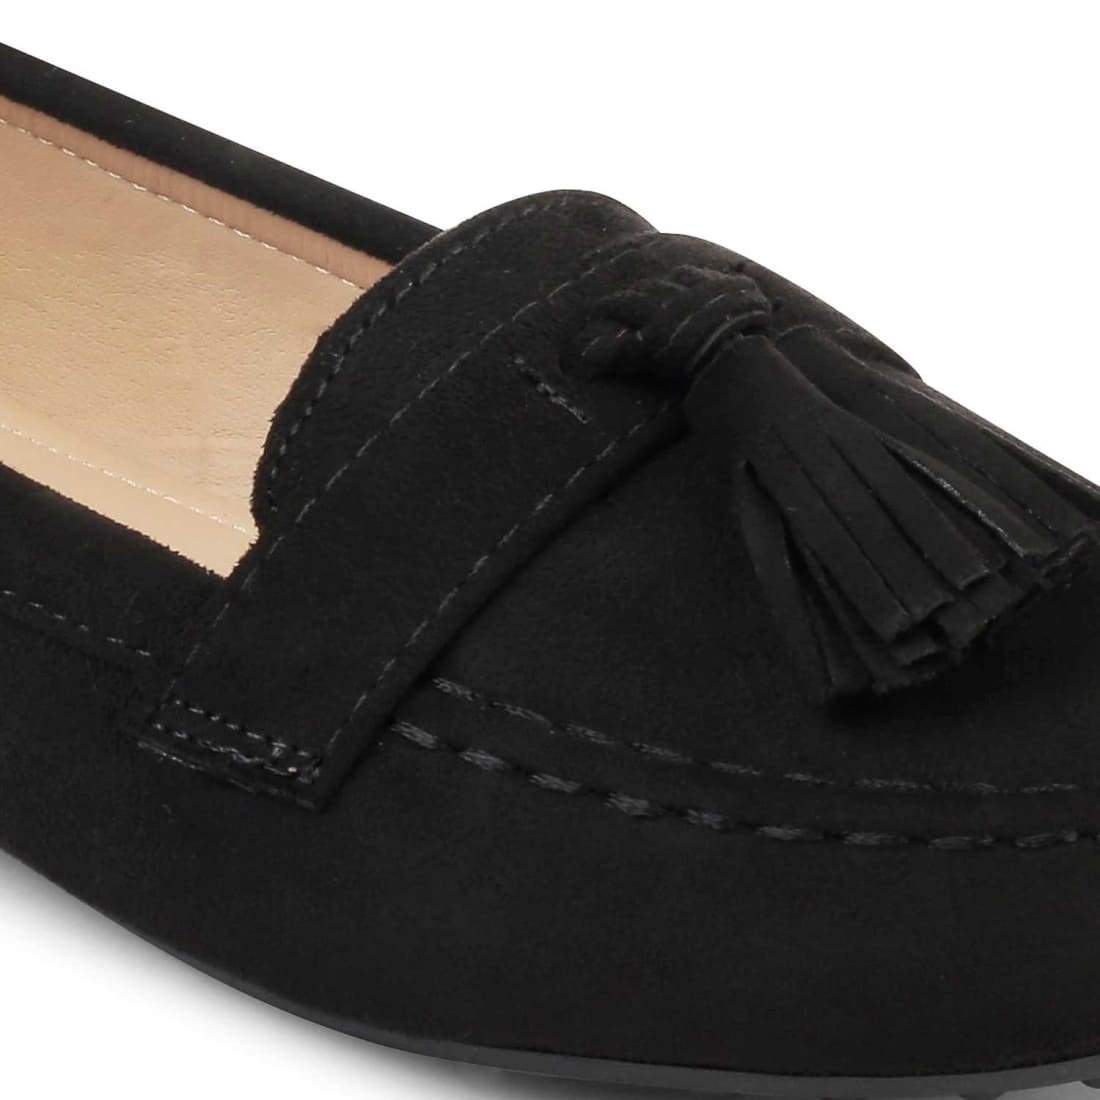 The Mia New Black Women's Dress Loafers Tresmode - Tresmode